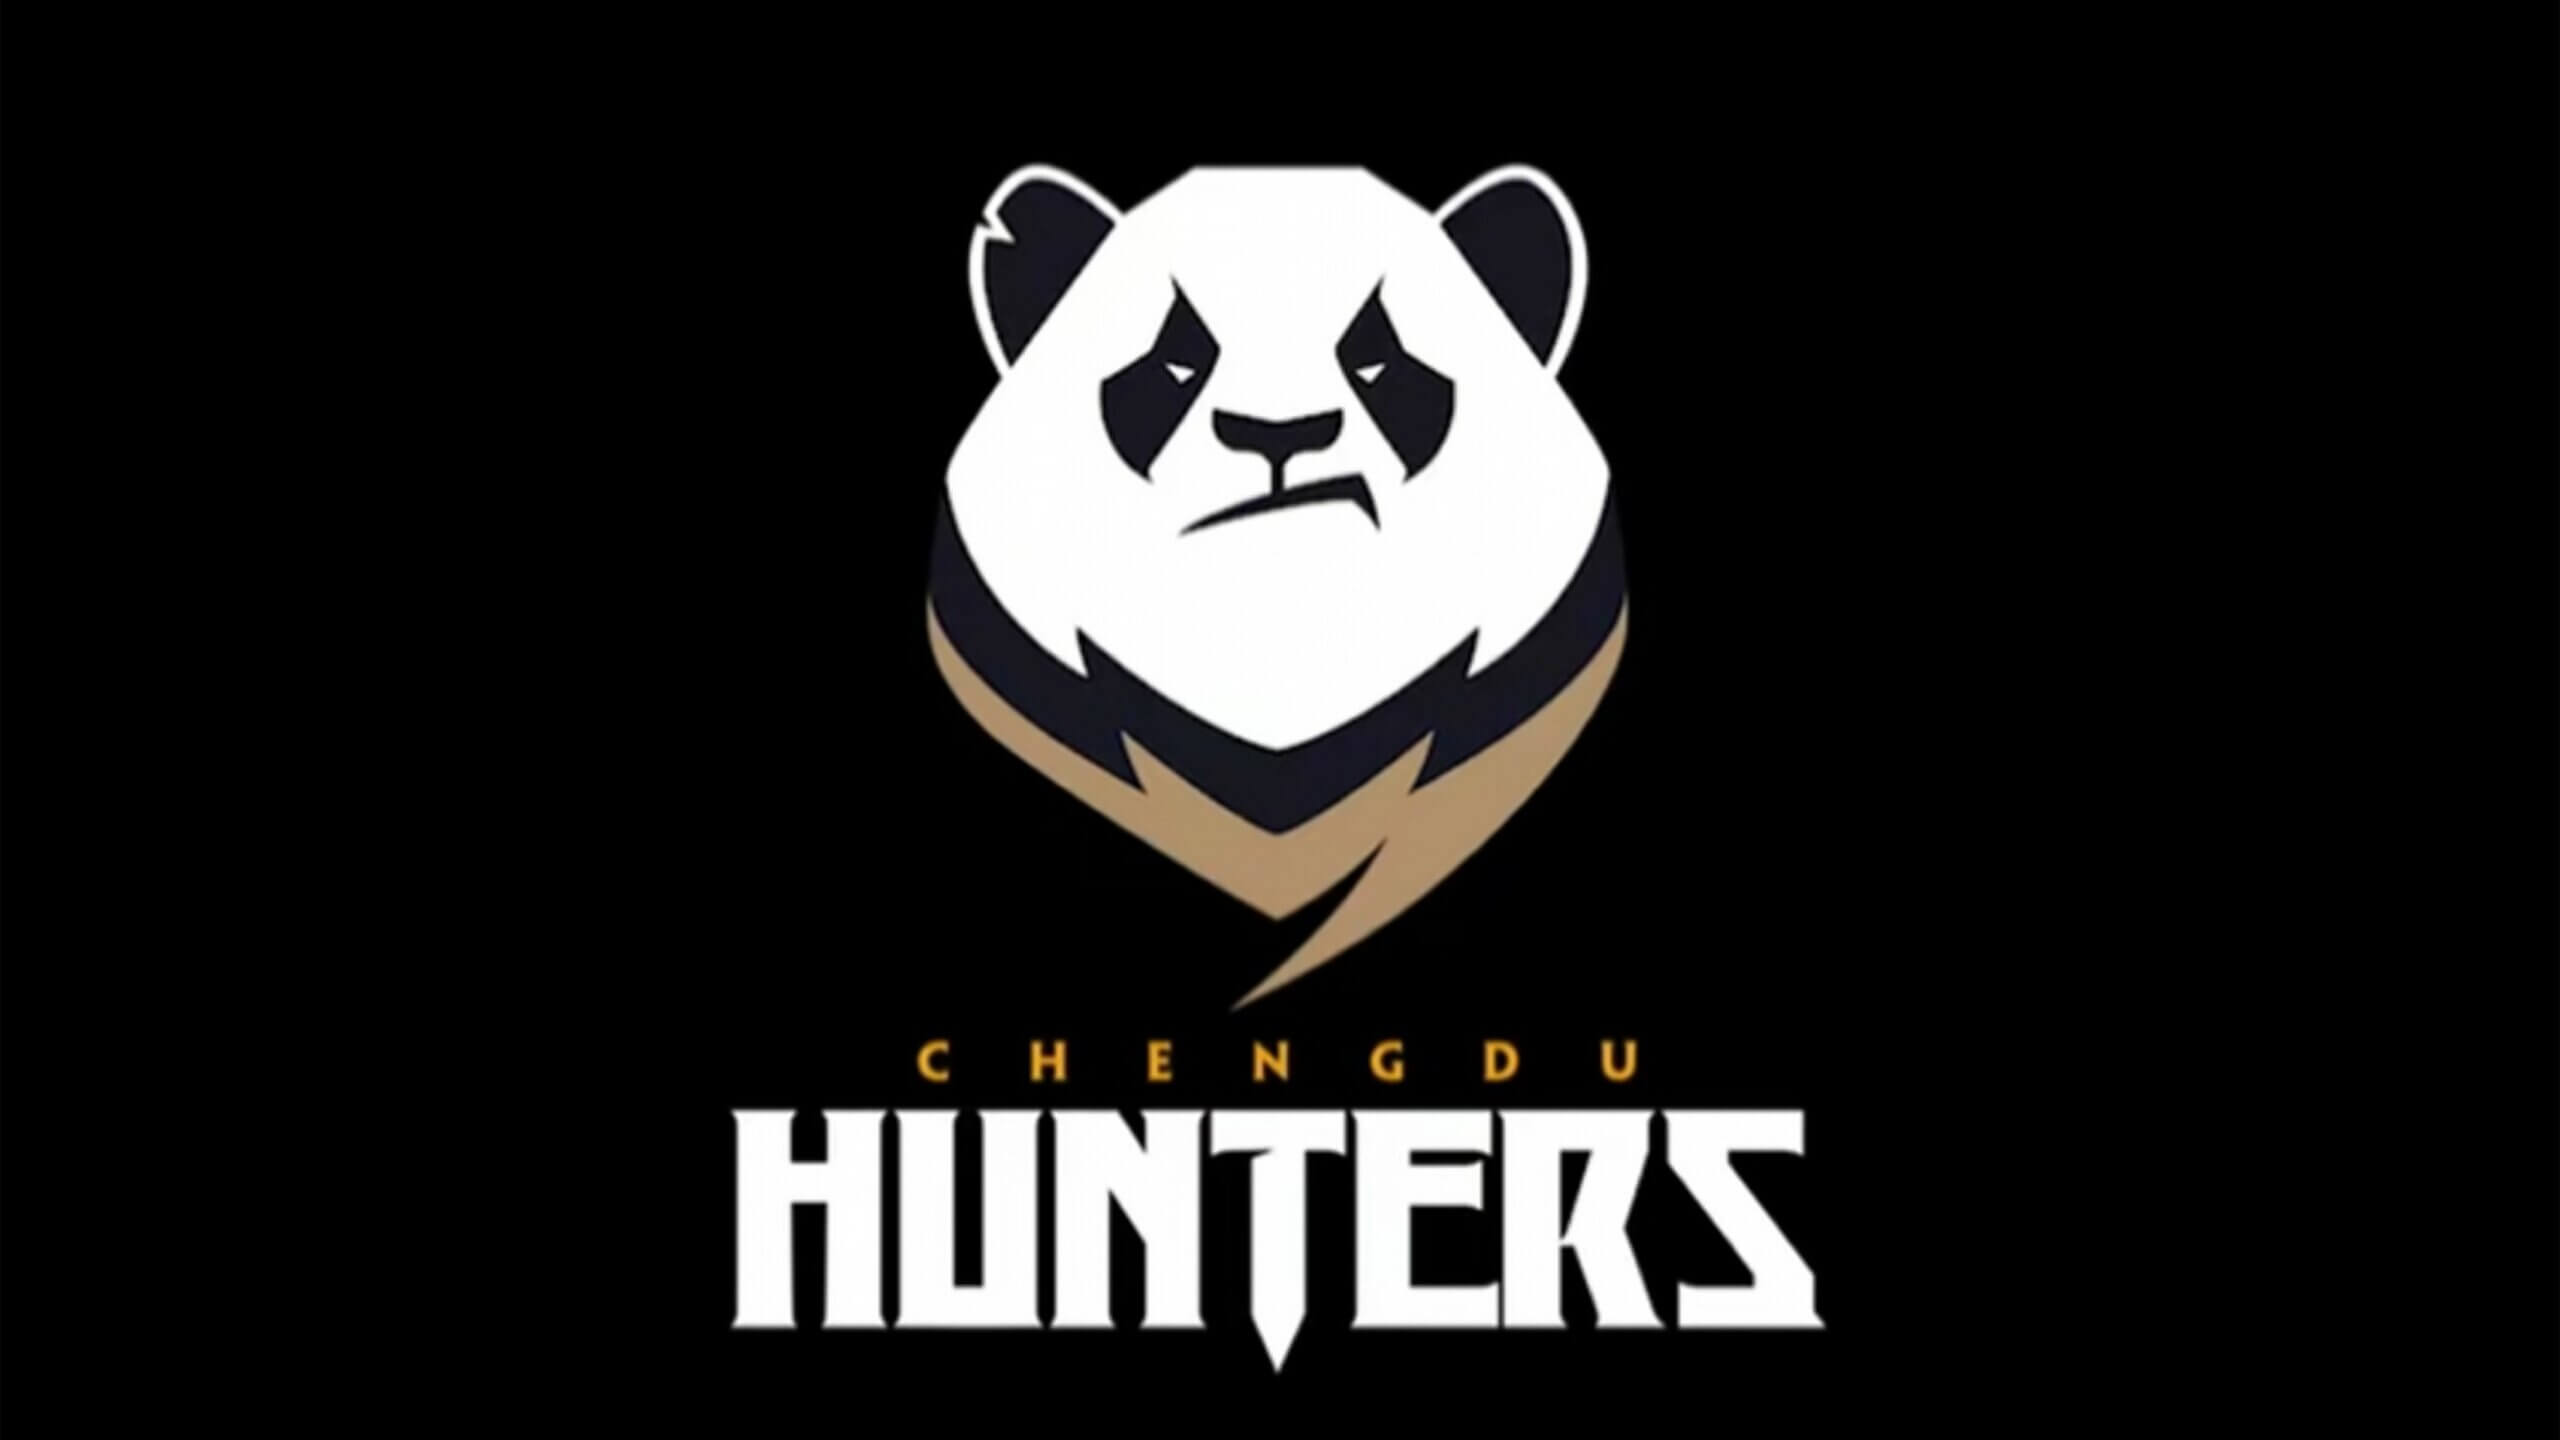 Overwatch League: The players of the Chengdu Hunters franchise have left the team